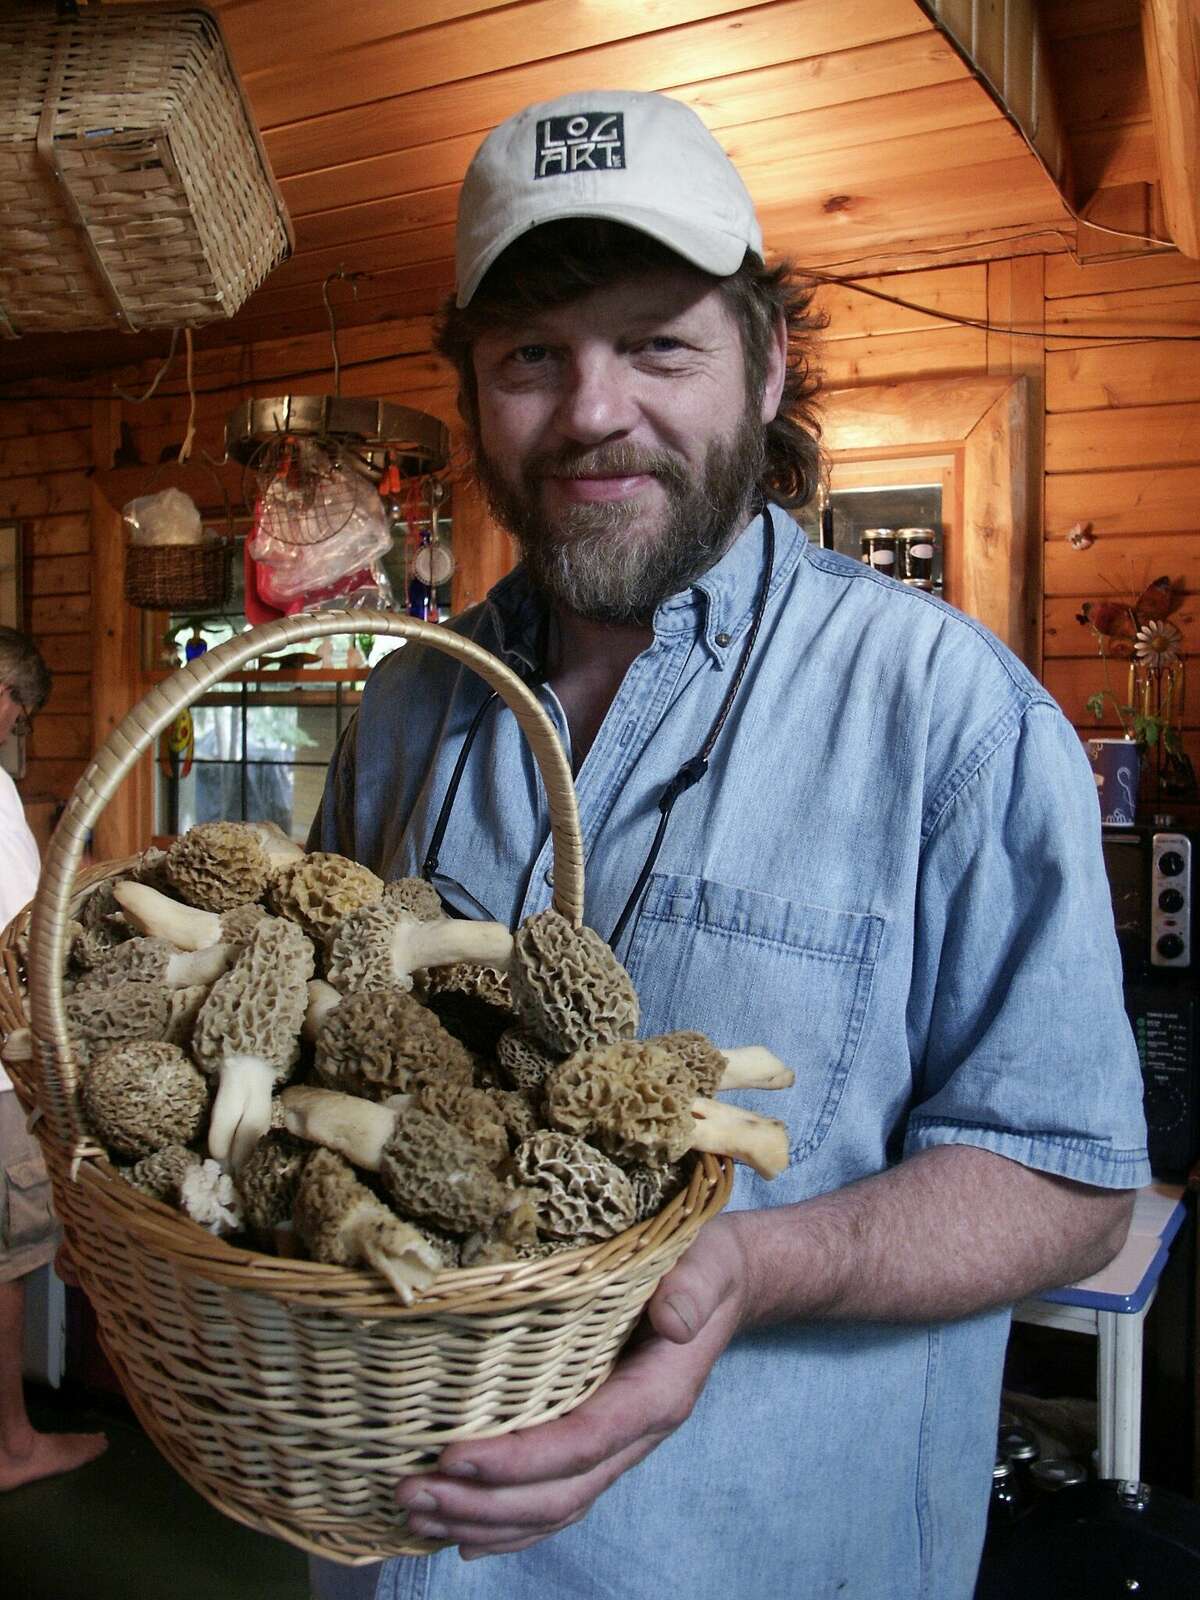 In April, the Big Rapids Community Library is hosting an event featuring master morel mushroom hunter Anthony Williams who will explain tips and tricks for finding plenty of the delicious iconic fungi.